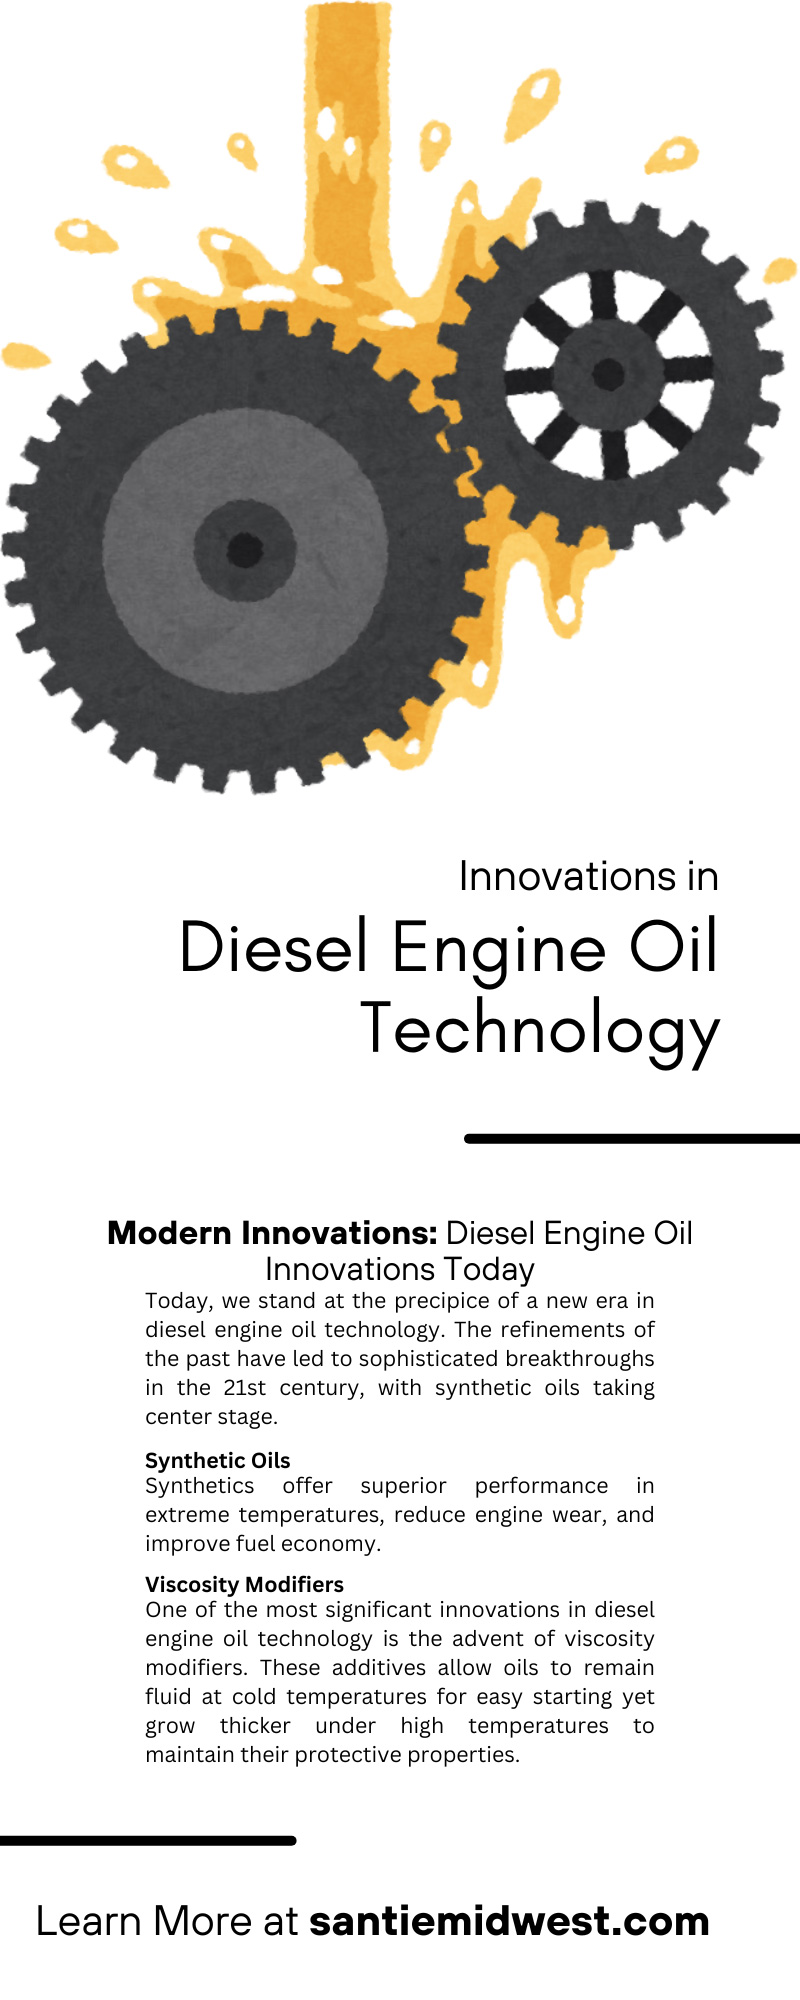 Innovations in Diesel Engine Oil Technology